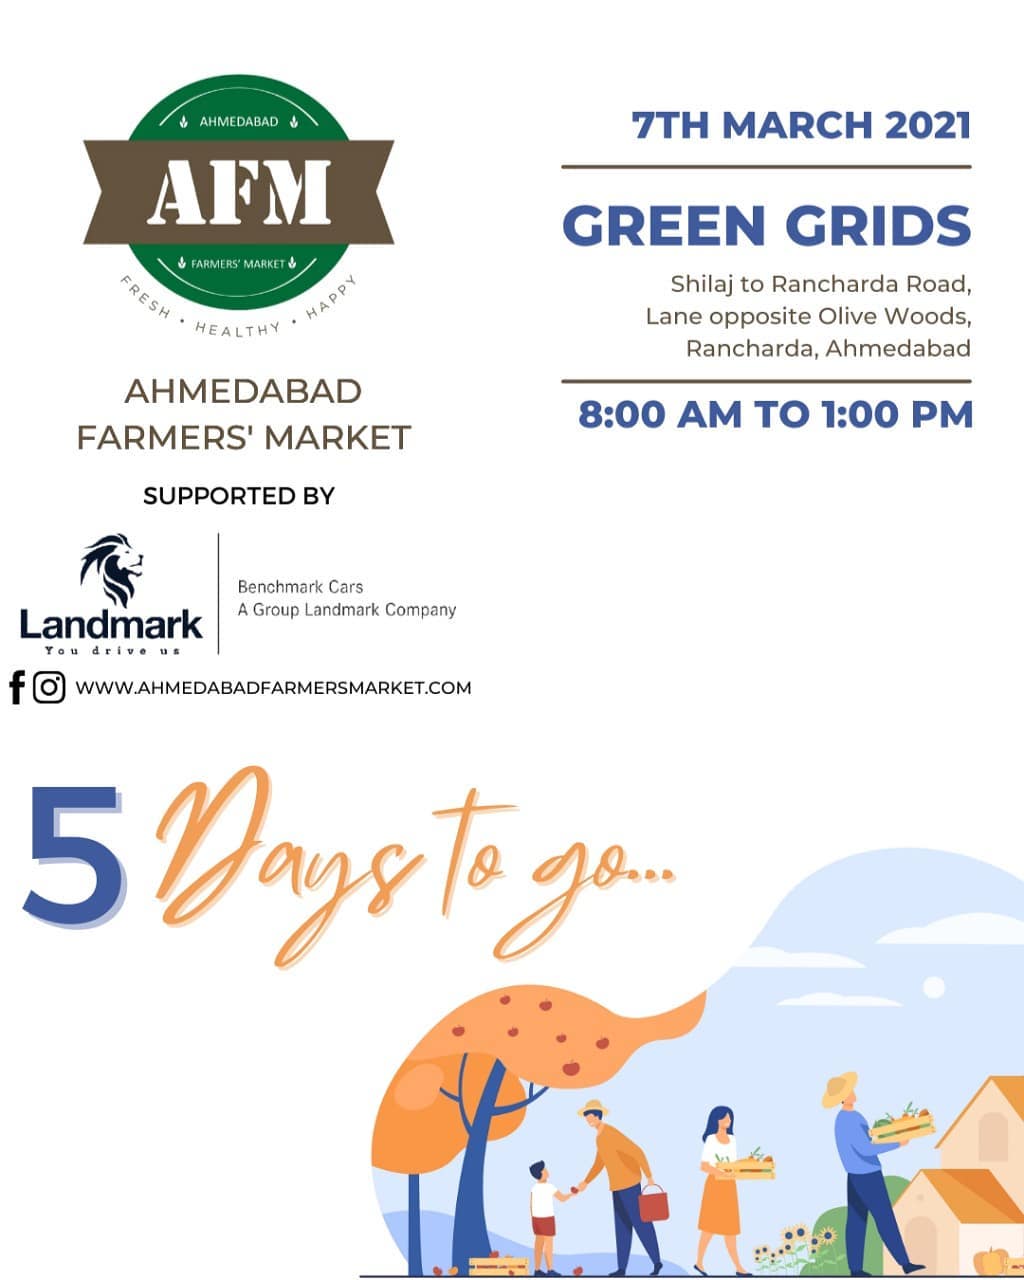 We are super-excited and awaiting your presence on 7th March 2021, Sunday from 8:00 am to 1:00 pm at Green Grids, Shilaj to Rancharda Road, In the lane opposite Olive Woods, Rancharda, Ahmedabad.
.
.
.
#ahmedabadfarmersmarket #ahmedabad #farmersmarketfresh #farmersmarketinndia #farmersmarket #gujarat #freshfood #farmfresh #fruits #veggies #bakery #grocery #chocolates #vegan #dairy #cheese #bakers #afm #localmarket #ahmedabad_instagram #freshandhomemadeproducts #fresh #homemade #gourmet #ahmedabad